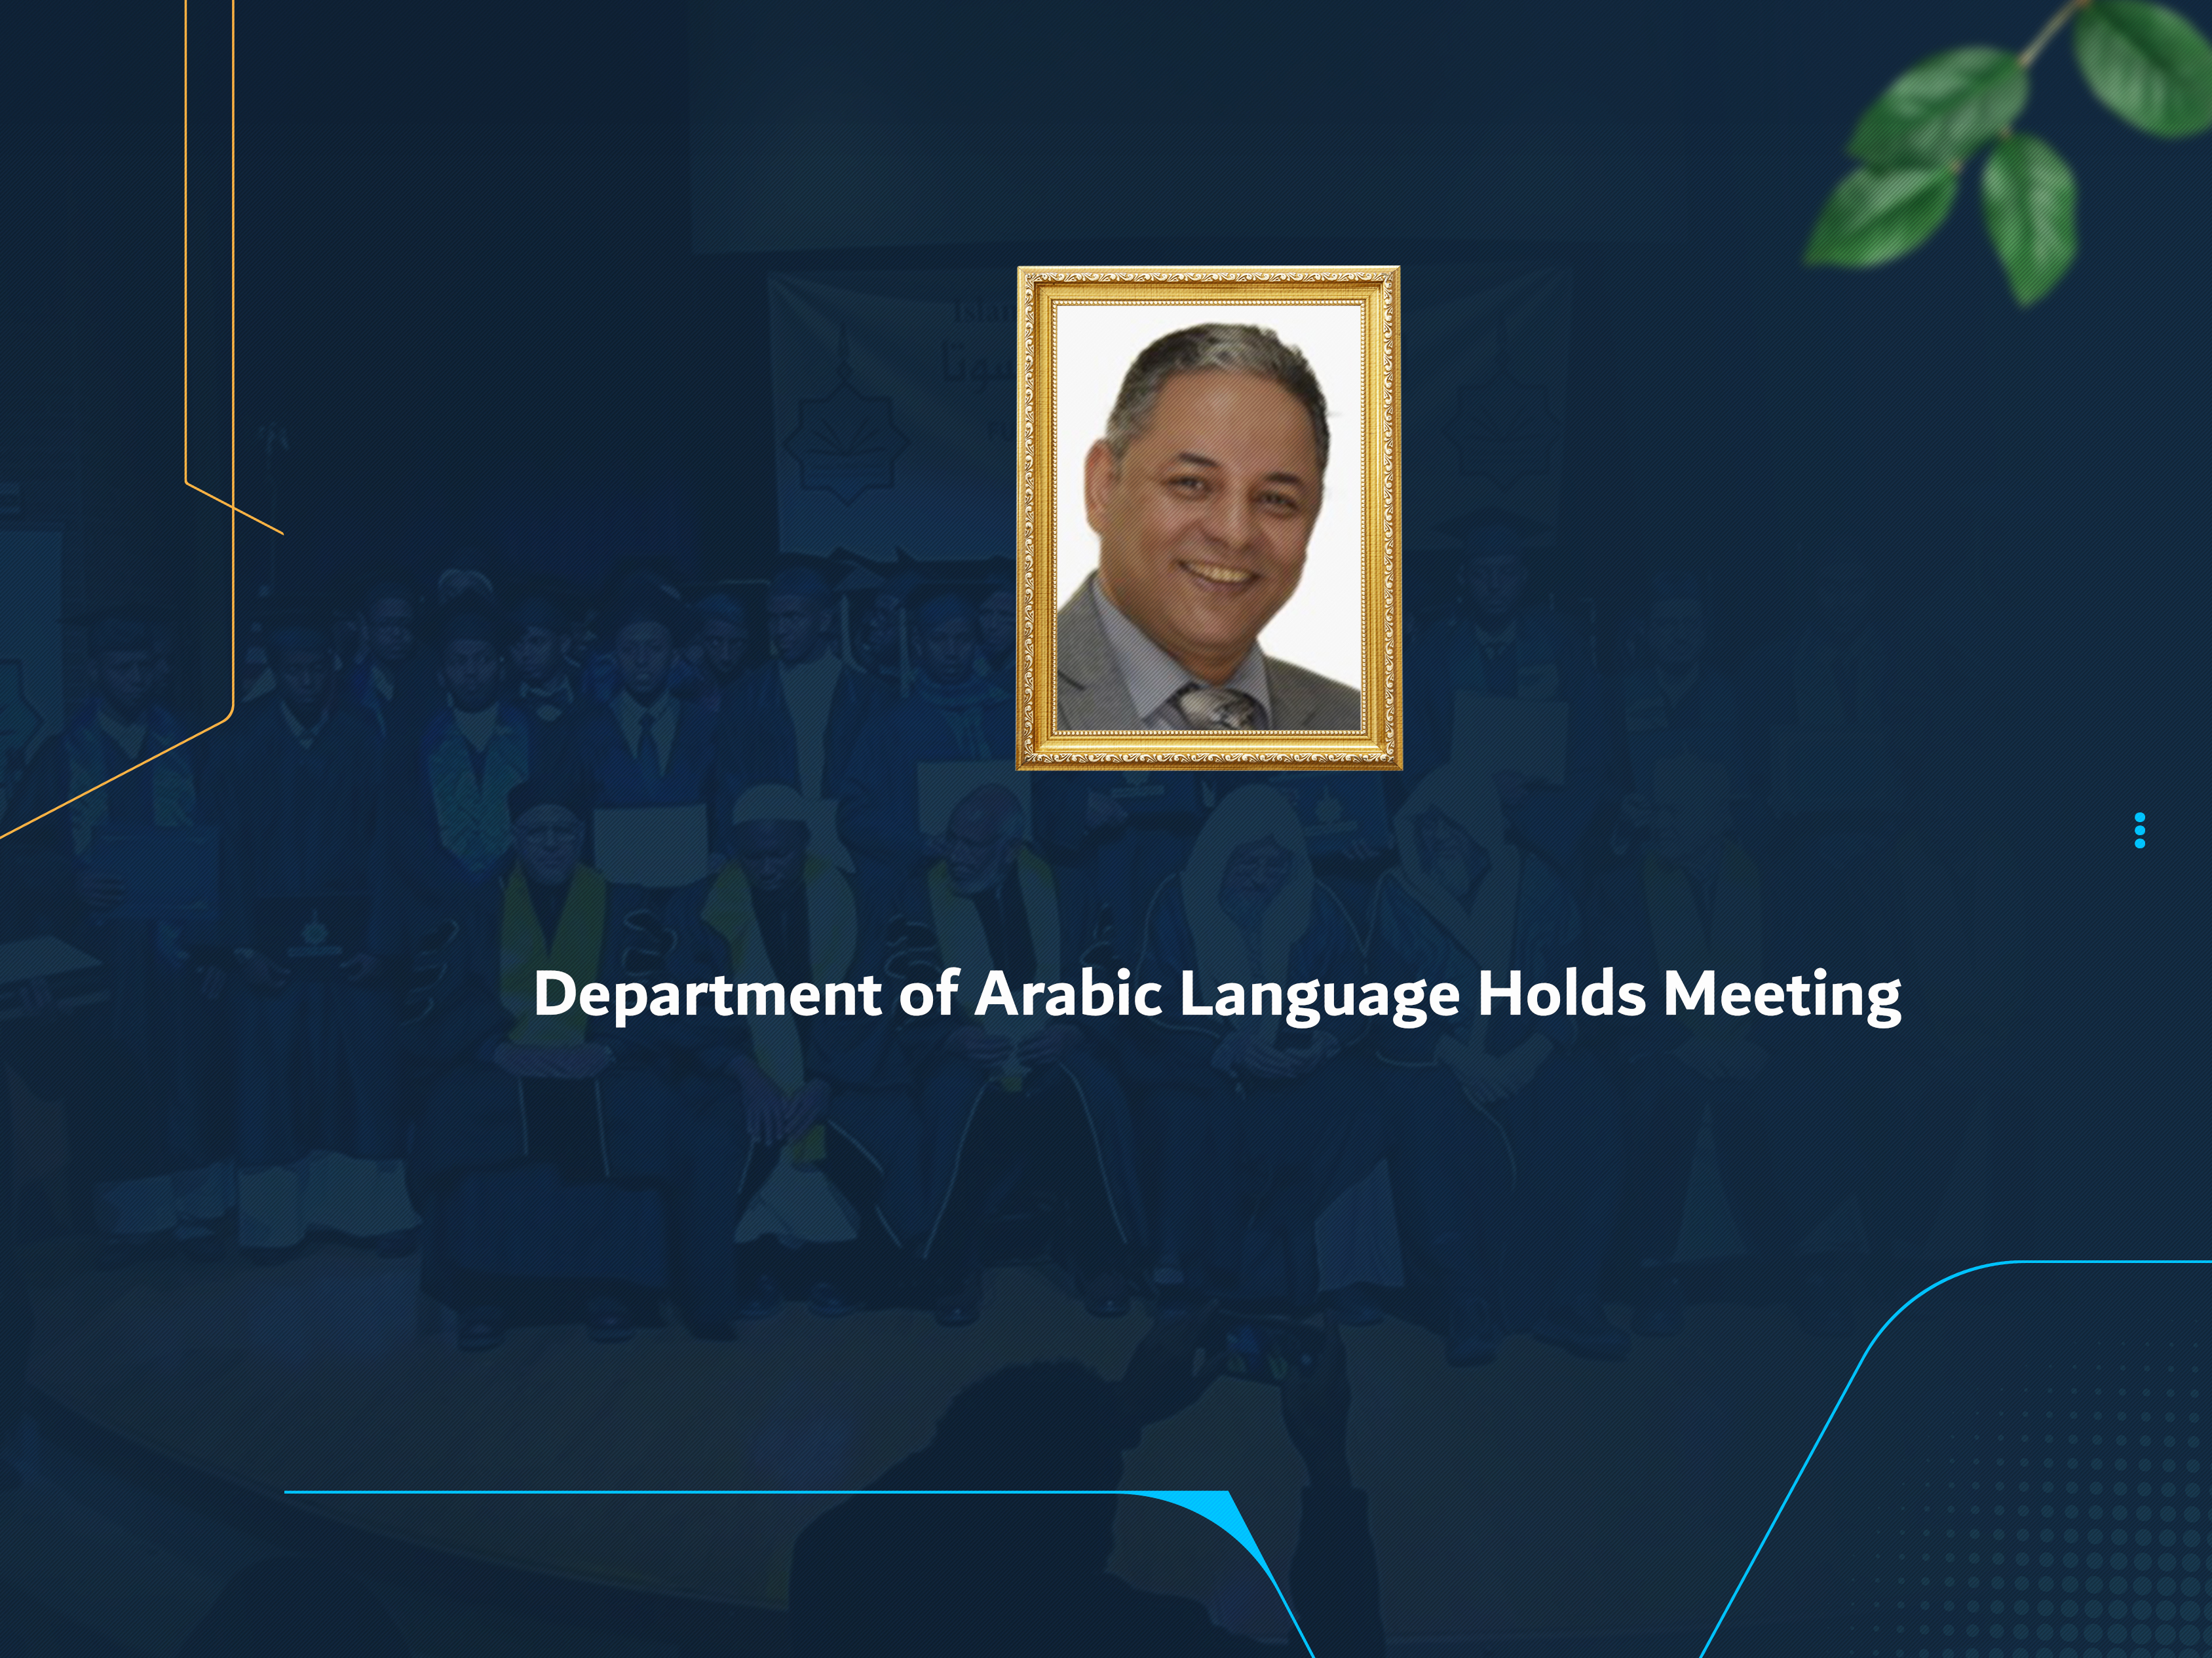 Department of Arabic Language Holds Meeting